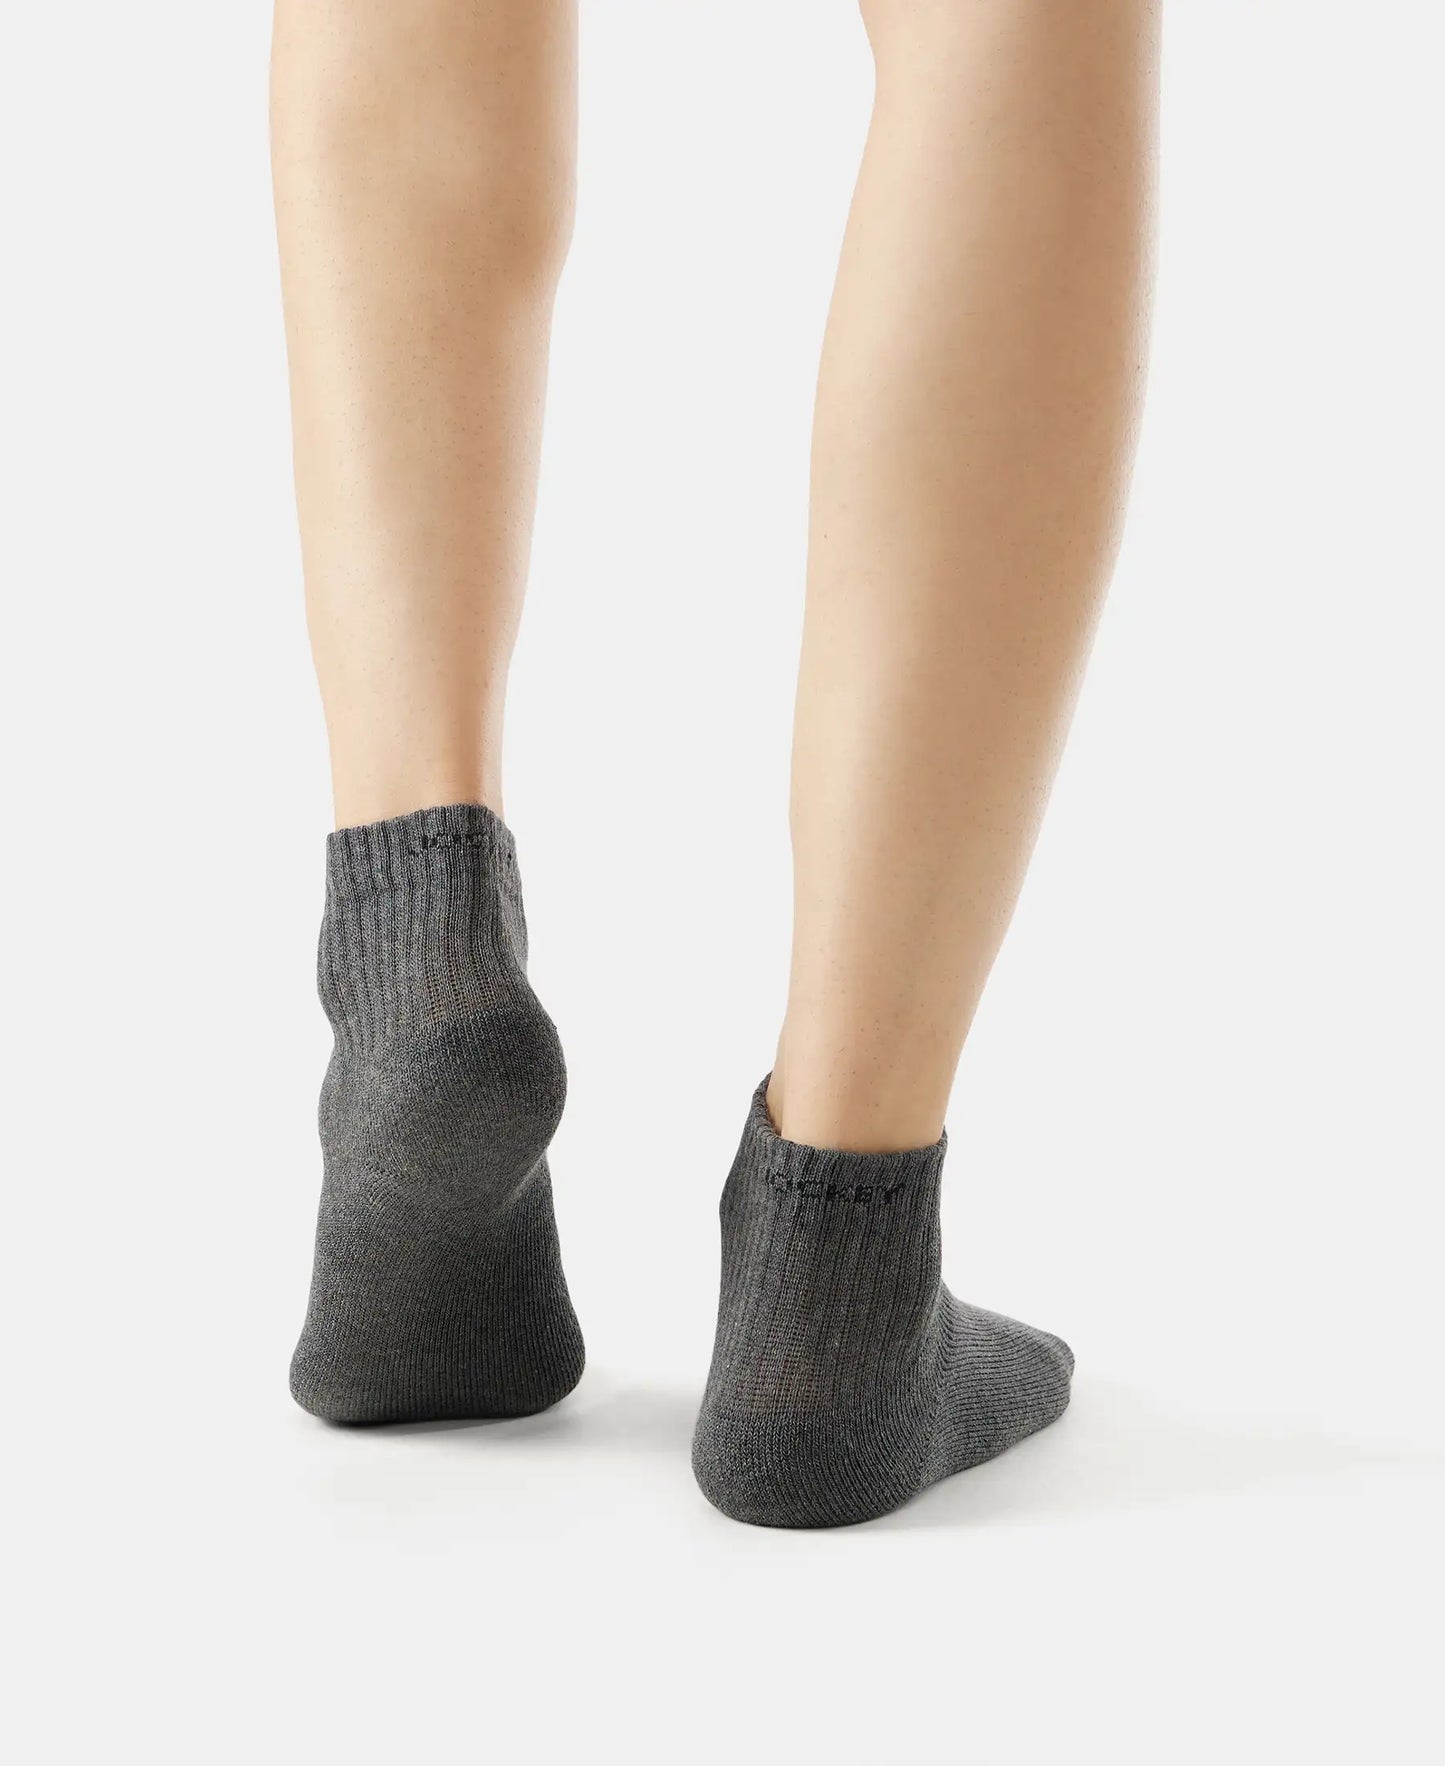 Compact Cotton Terry Ankle Length Socks With StayFresh Treatment - Black/Midgrey Melange/Charcoal Melange-12